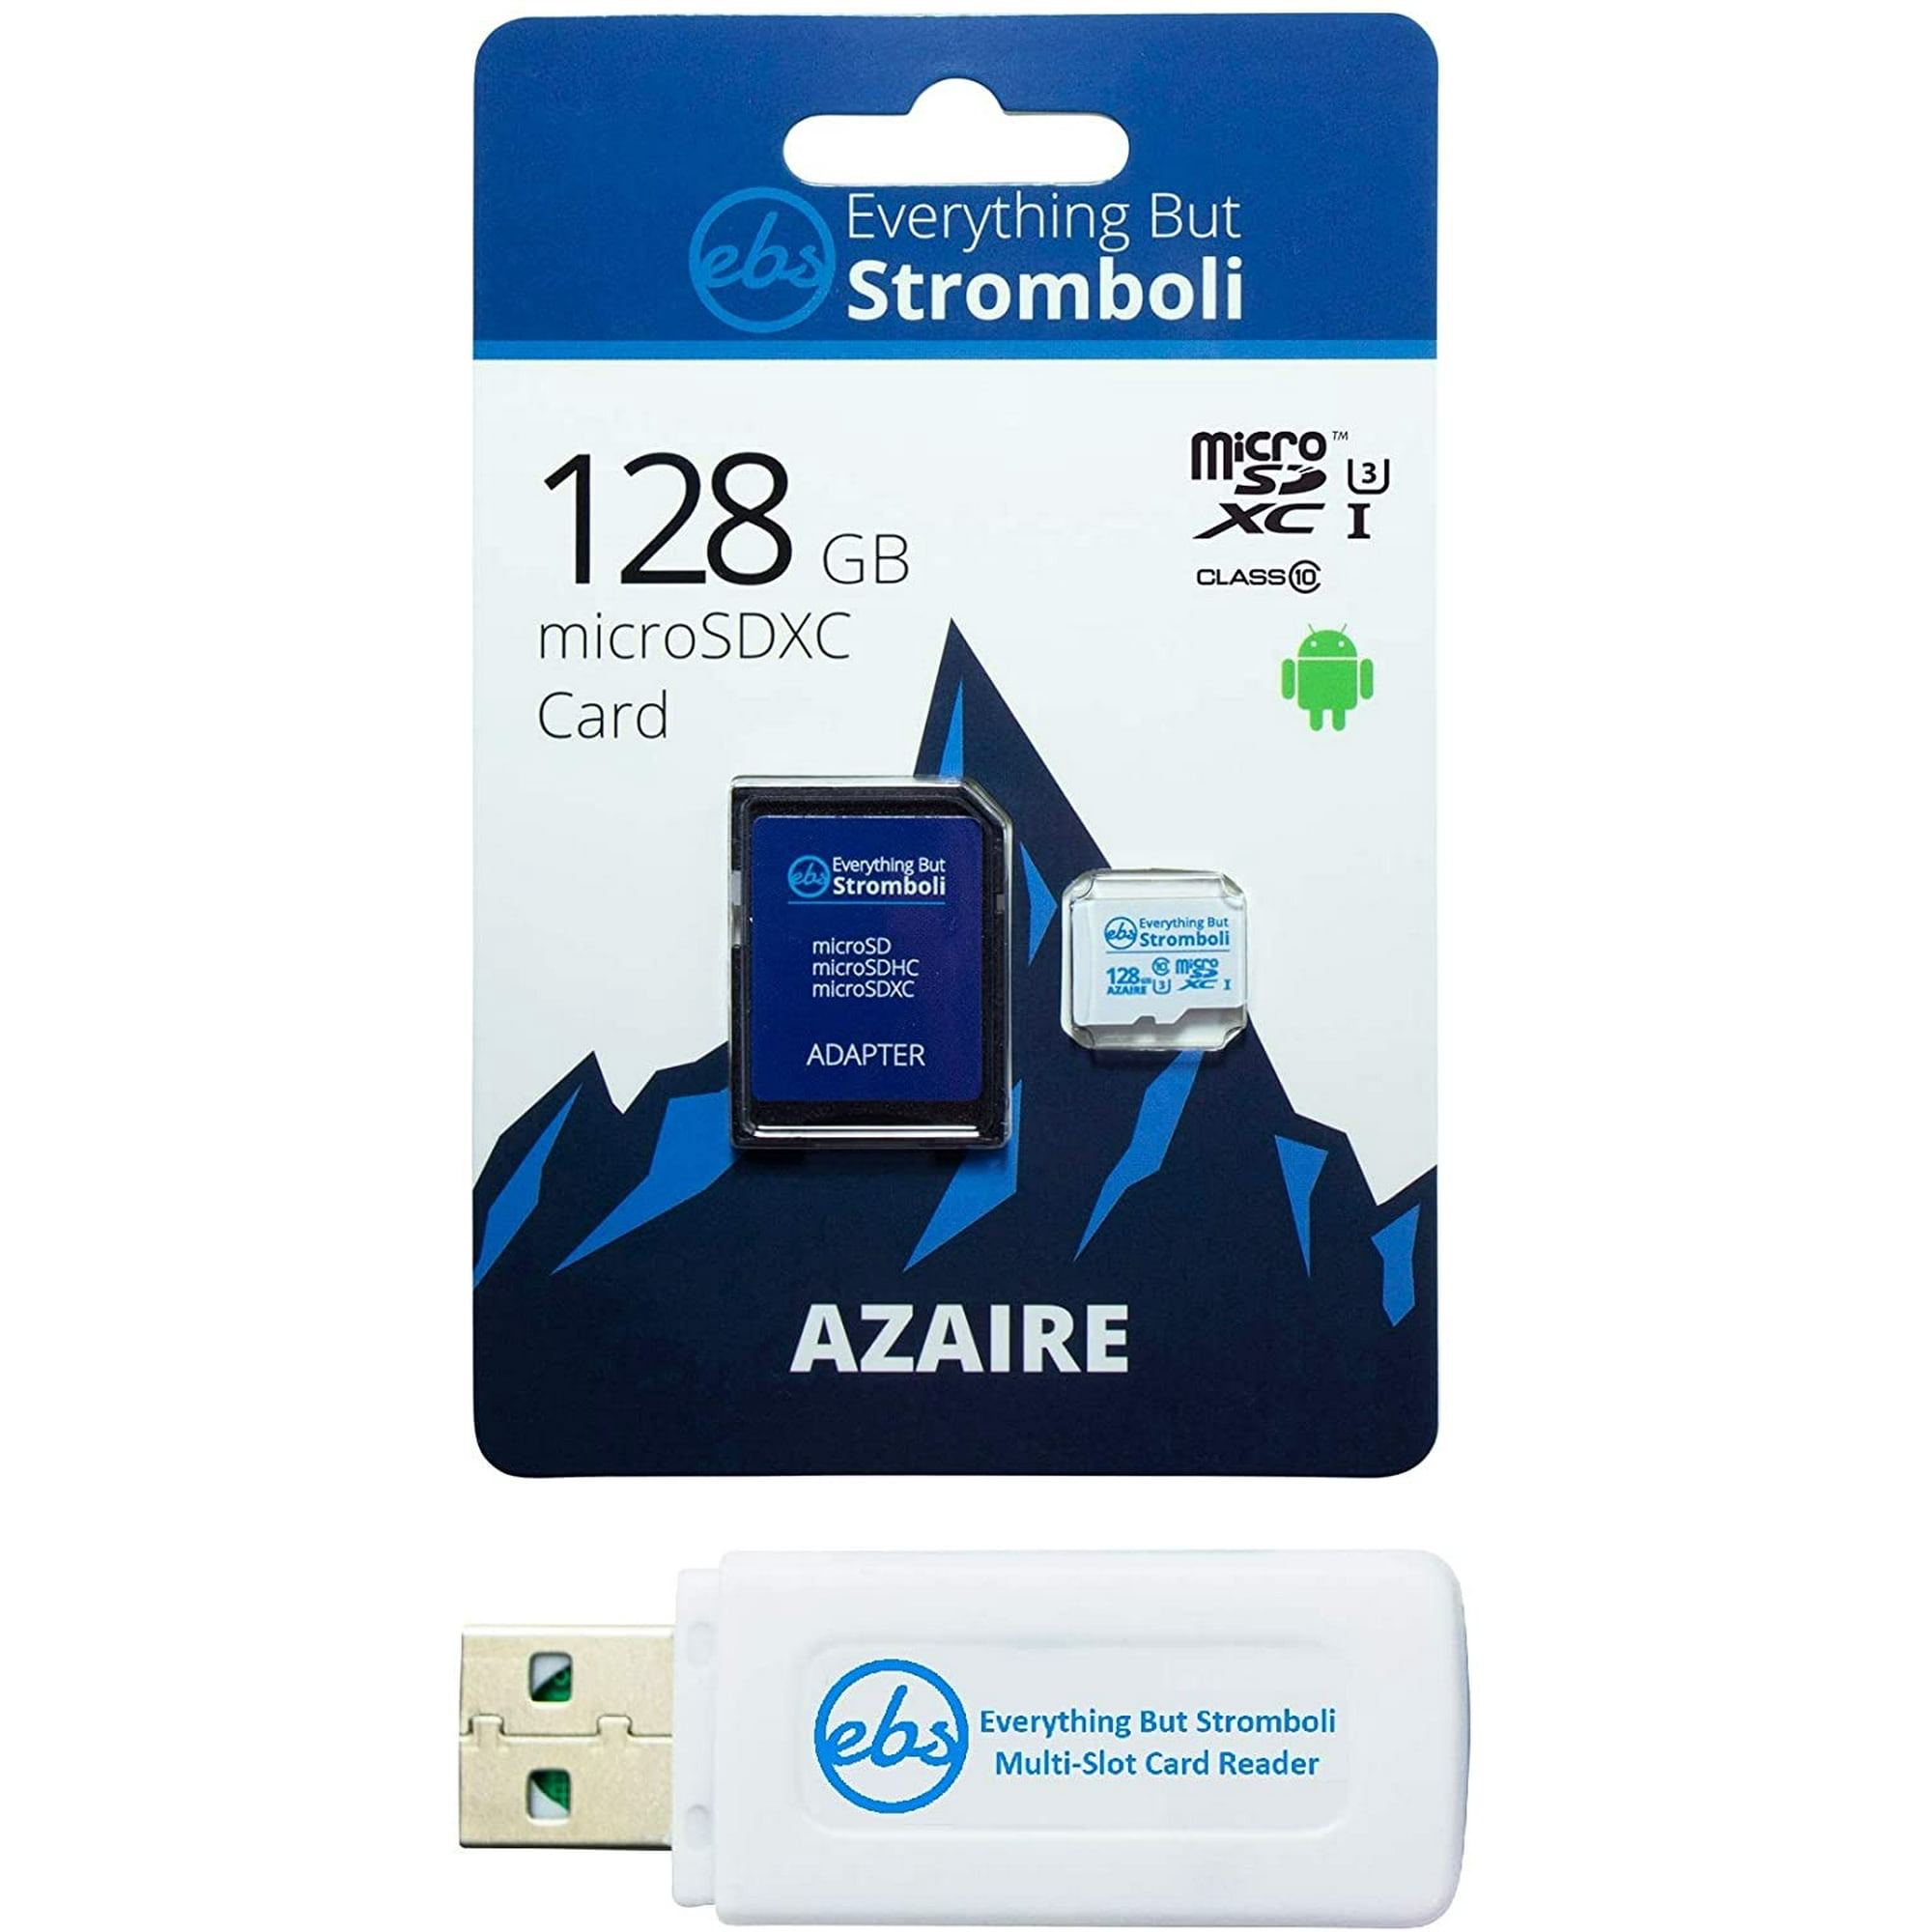 Korst reservering Geheugen Everything But Stromboli 128GB Azaire MicroSD Card for GoPro Action Camera  Works with Hero 9 Black Class 10 U3 UHS-1 | Walmart Canada